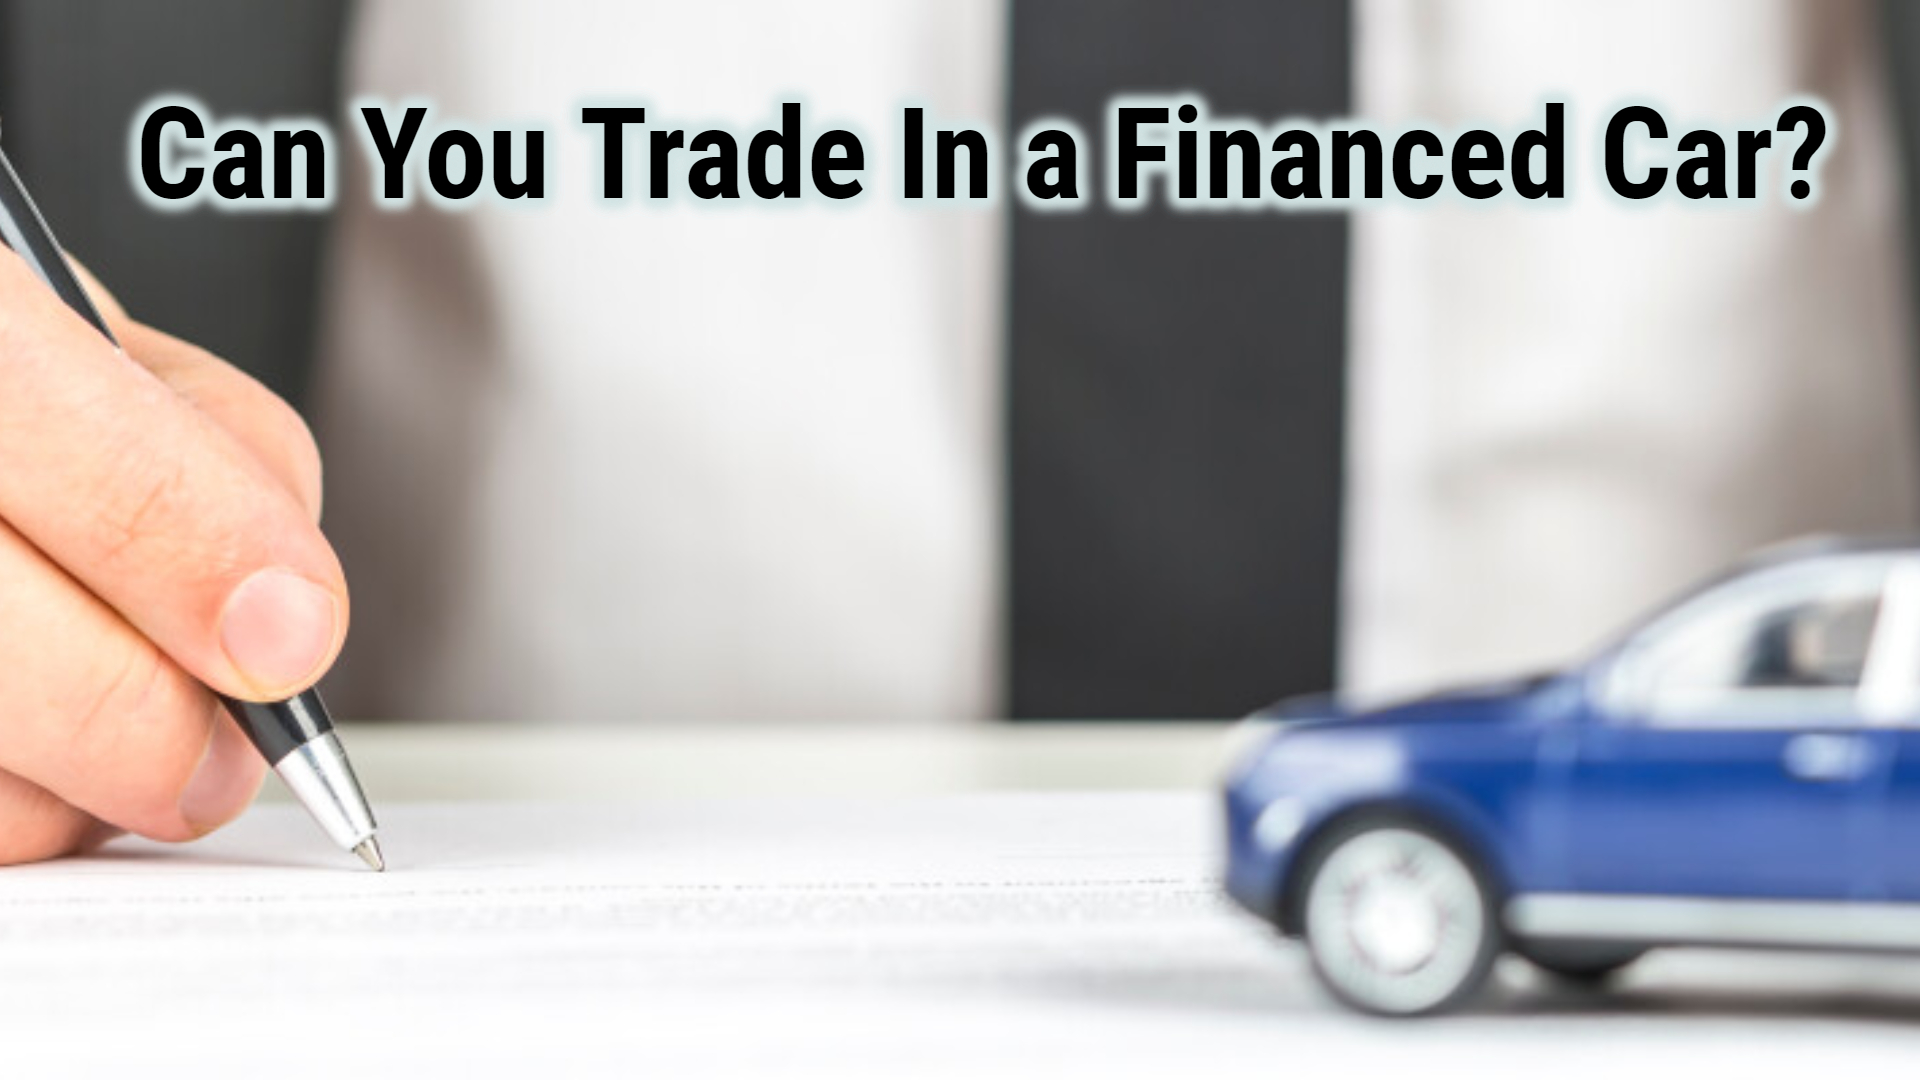 Can You Trade In a Financed Car?